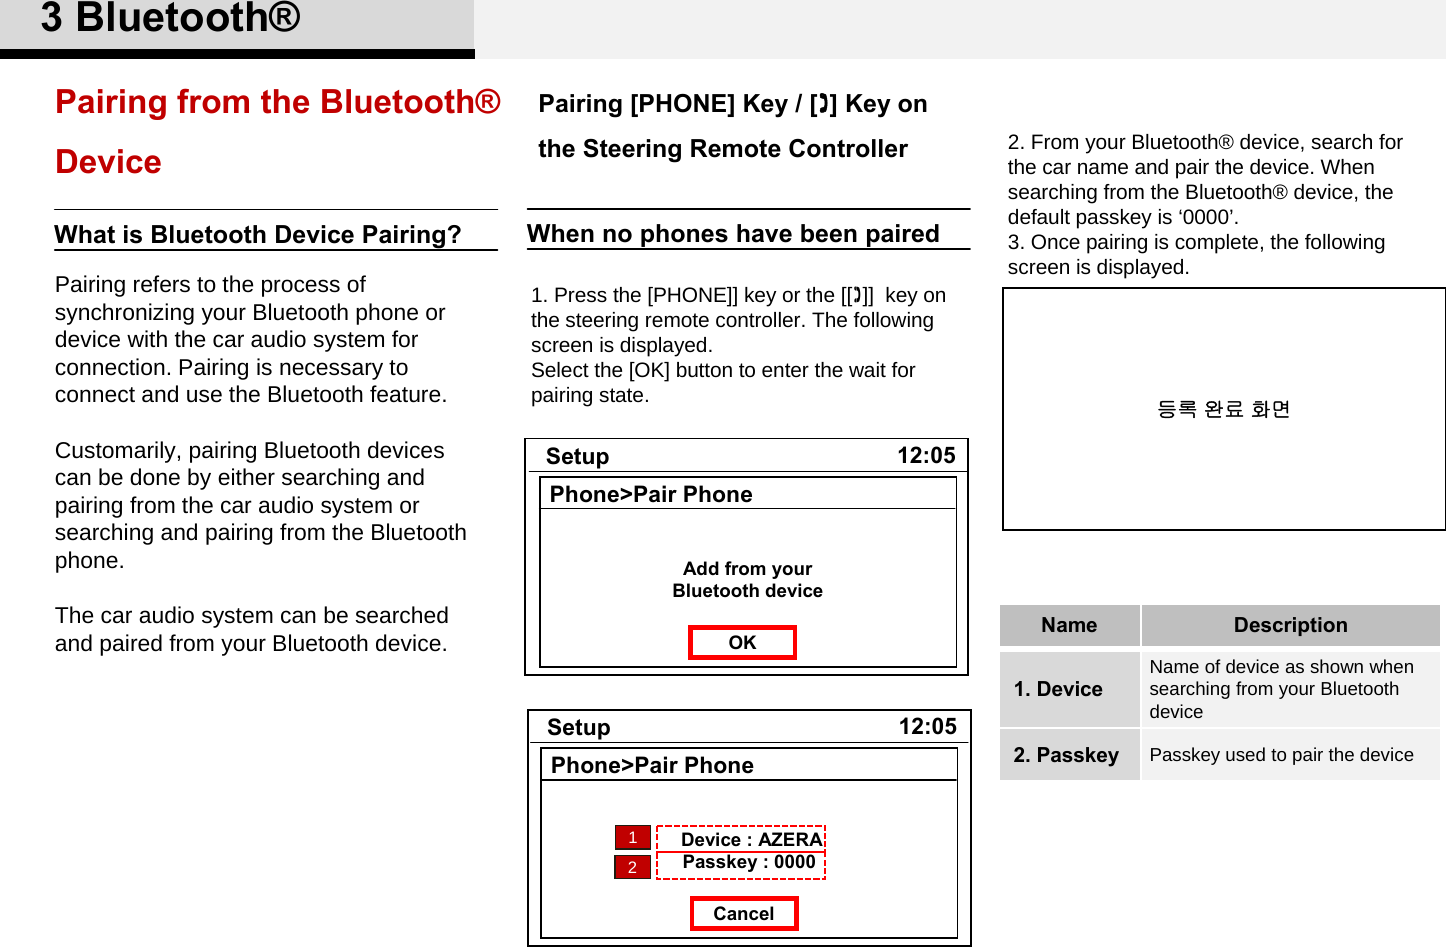 Pairing from the Bluetooth®Device1. Press the [PHONE]] key or the [[]]  key on the steering remote controller. The following screen is displayed.Select the [OK] button to enter the wait for pairing state. 12:05Setup트랙 01Phone&gt;Pair PhoneAdd from yourBluetooth deviceOK12:05Setup트랙 01Phone&gt;Pair PhoneDevice : AZERAPasskey : 0000Cancel2. From your Bluetooth® device, search forthe car name and pair the device. When searching from the Bluetooth® device, the default passkey is ‘0000’.3. Once pairing is complete, the following screen is displayed. 등록 완료 화면12Pairing [PHONE] Key / [] Key on the Steering Remote ControllerName Description1. DeviceName of device as shown when searching from your Bluetooth device2. Passkey Passkey used to pair the devicePairing refers to the process of synchronizing your Bluetooth phone or device with the car audio system for connection. Pairing is necessary to connect and use the Bluetooth feature.Customarily, pairing Bluetooth devices can be done by either searching and pairing from the car audio system or searching and pairing from the Bluetooth phone. The car audio system can be searched and paired from your Bluetooth device.What is Bluetooth Device Pairing? When no phones have been paired3 Bluetooth®